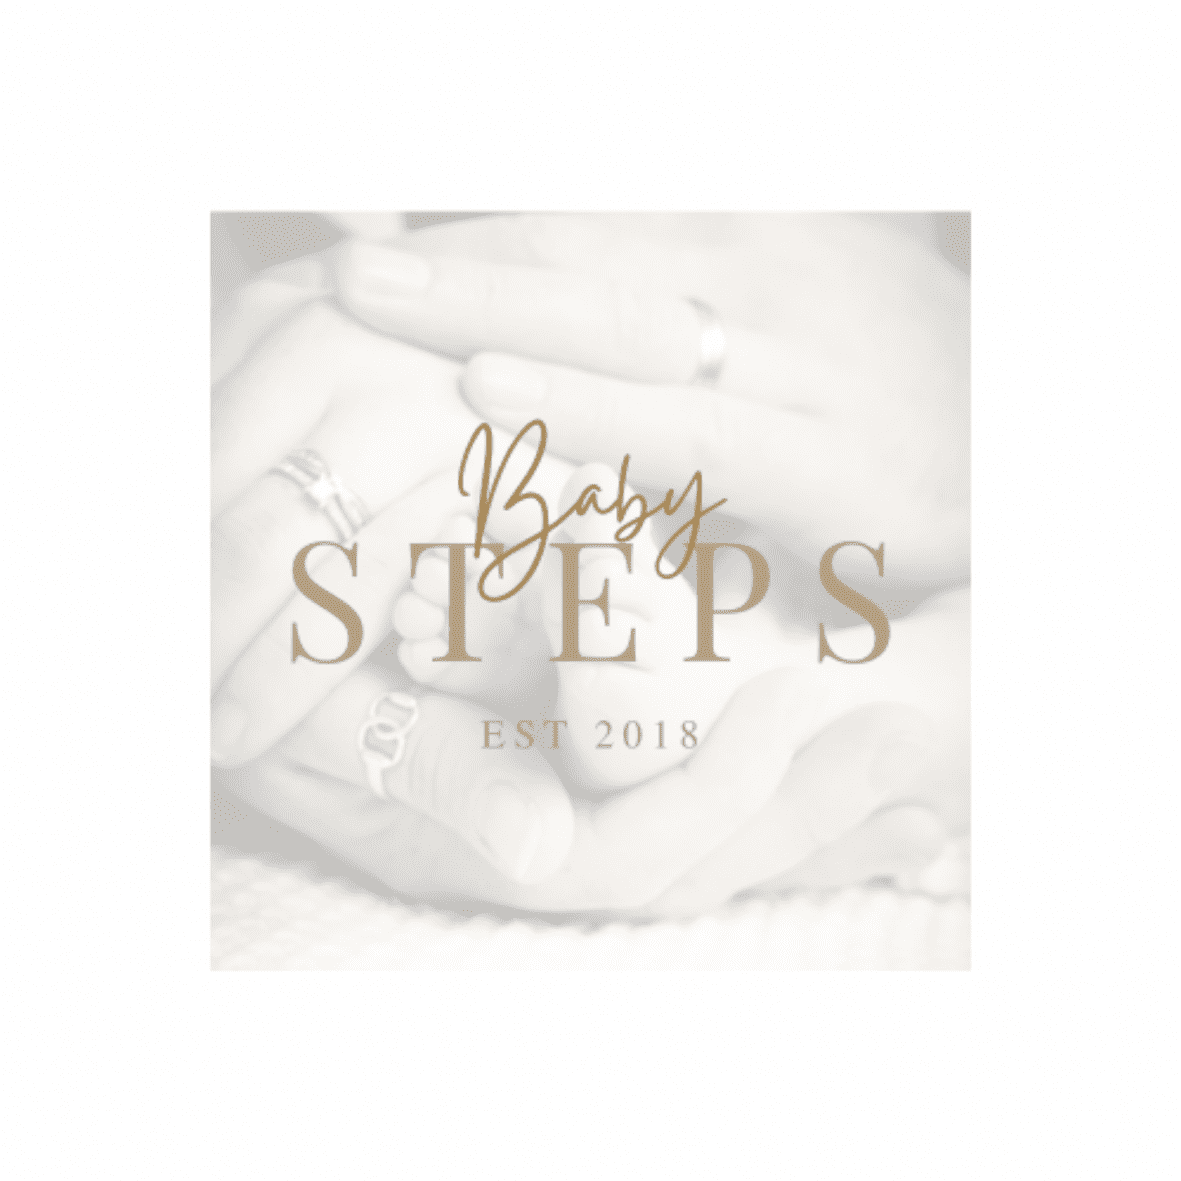 Baby steps image